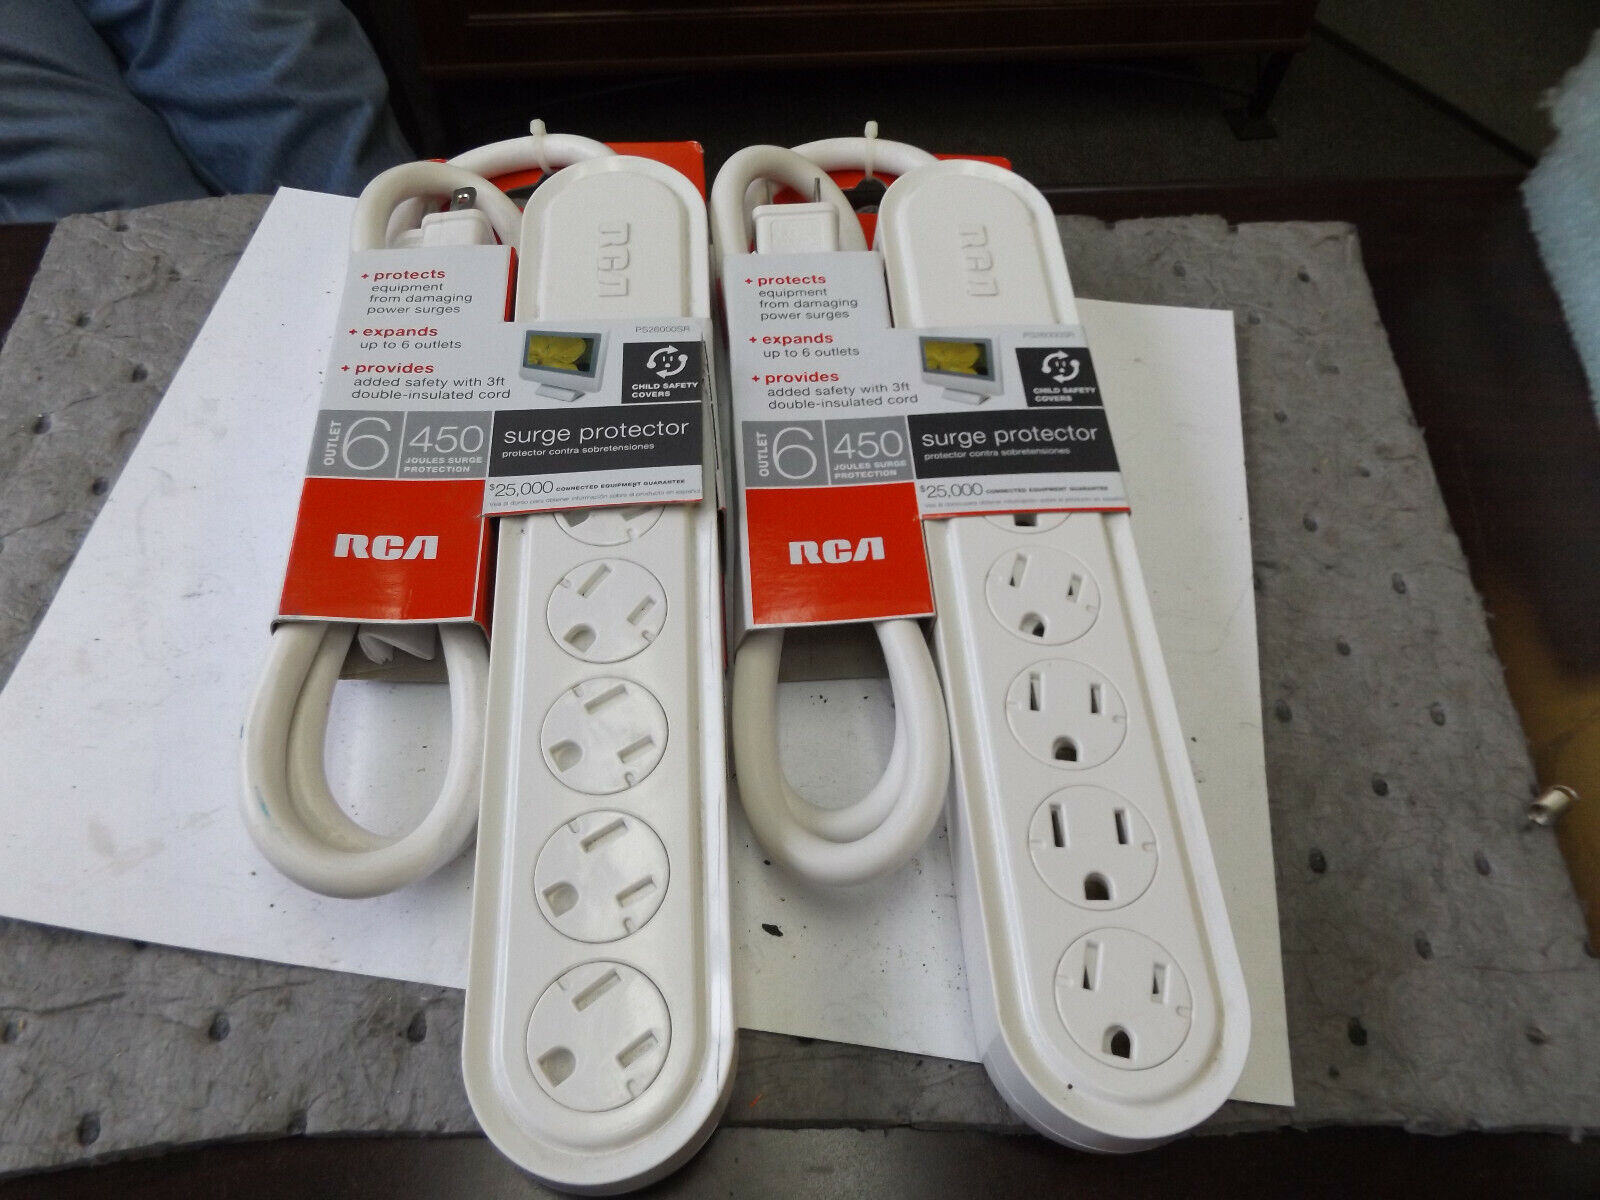 WHOLESALE RCA SURGE PROTECTOR 450 JOULES SURGE 6 OUTLET LOT OF 2 NEW OLD STOCK